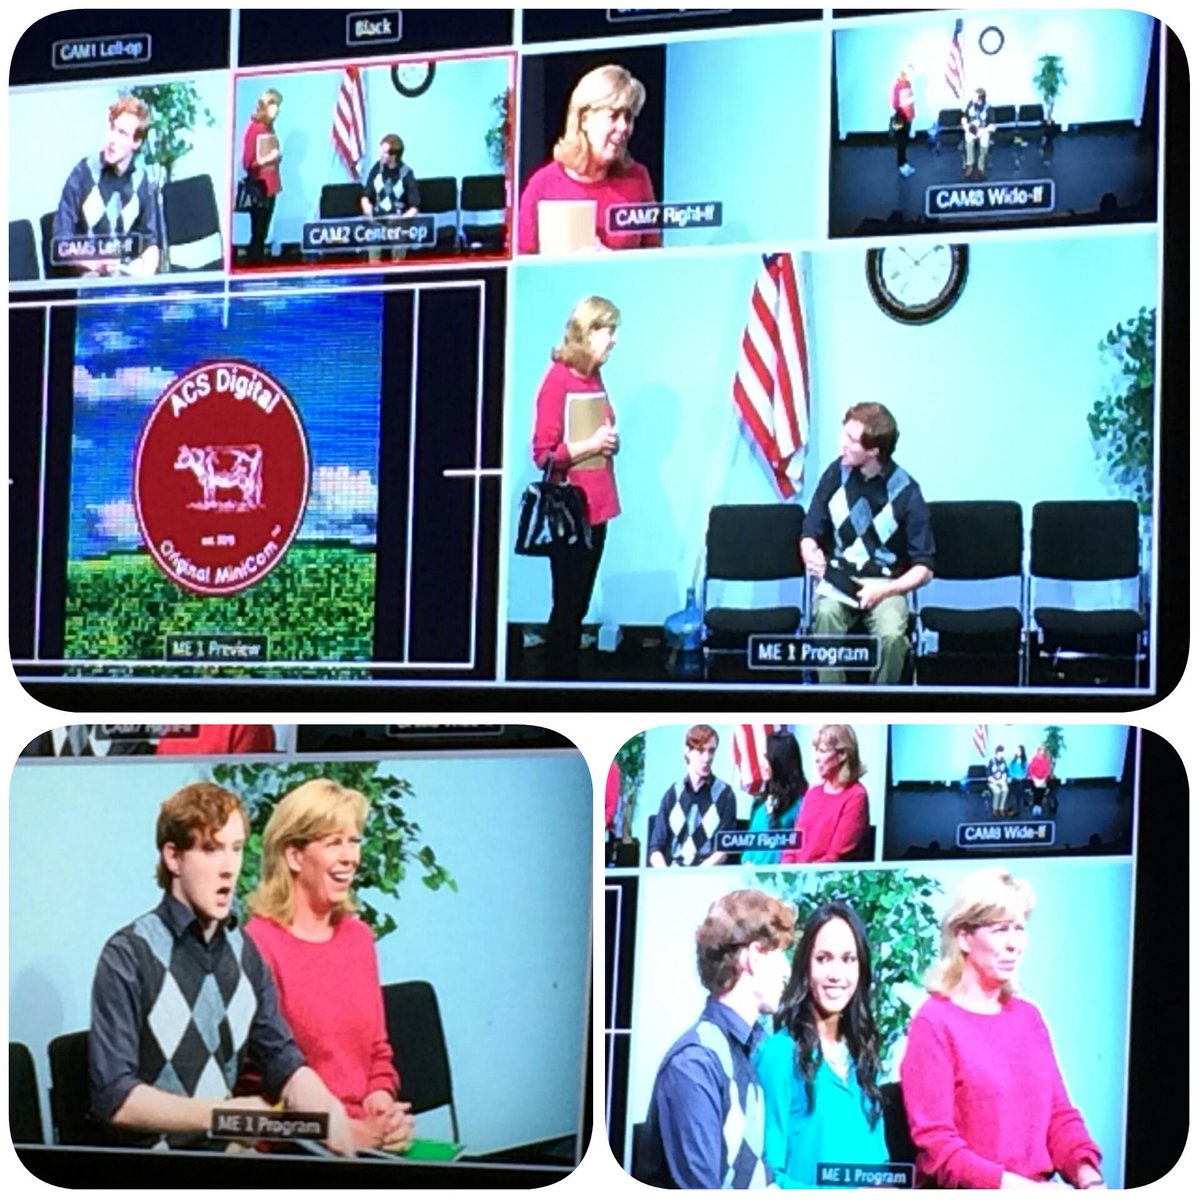 Sorry about the mix-up last night, guys. Here's a collage of some screen shots from the #ACSDigital #MiniCom Enjoy!